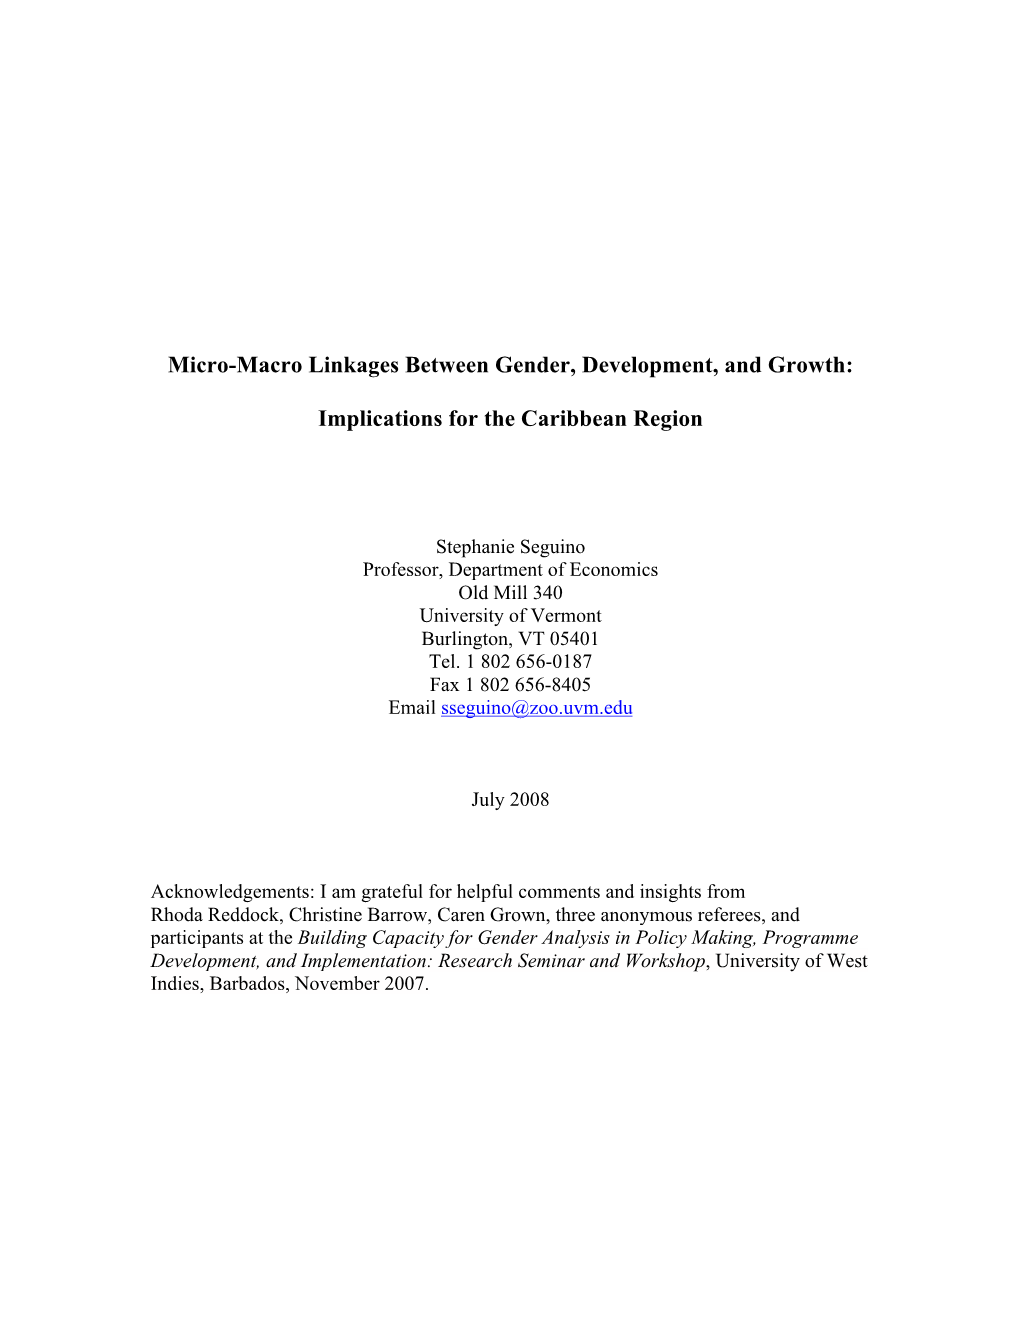 Micro-Macro Linkages Between Gender, Development, and Growth